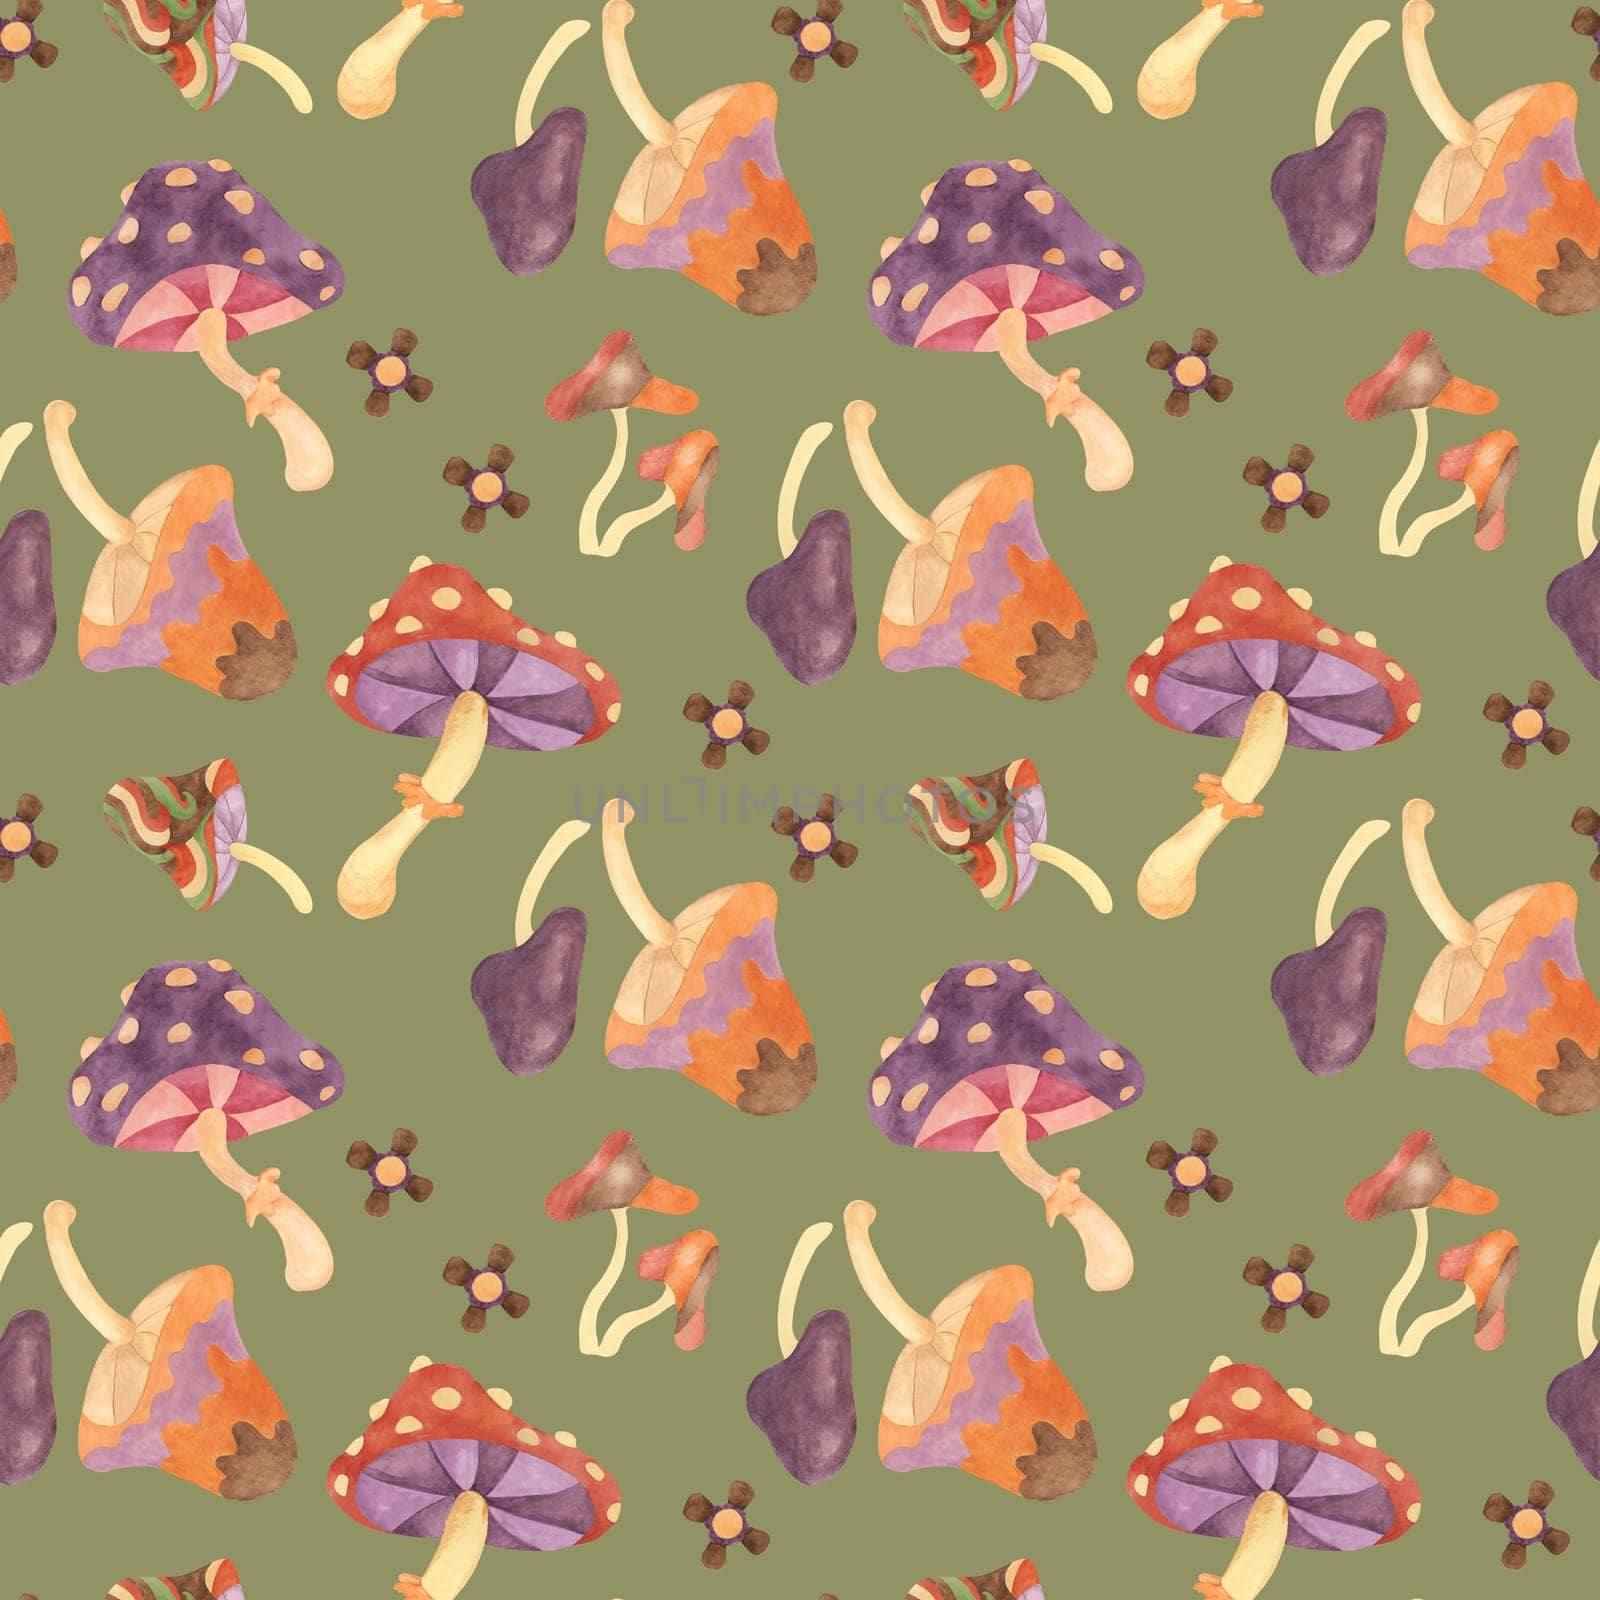 Fly agaric seamless pattern with retro mushrooms and flowers. Vintage hippie textile ornament Nostalgic print for clothing, wallpaper, scrapbooking by Fofito